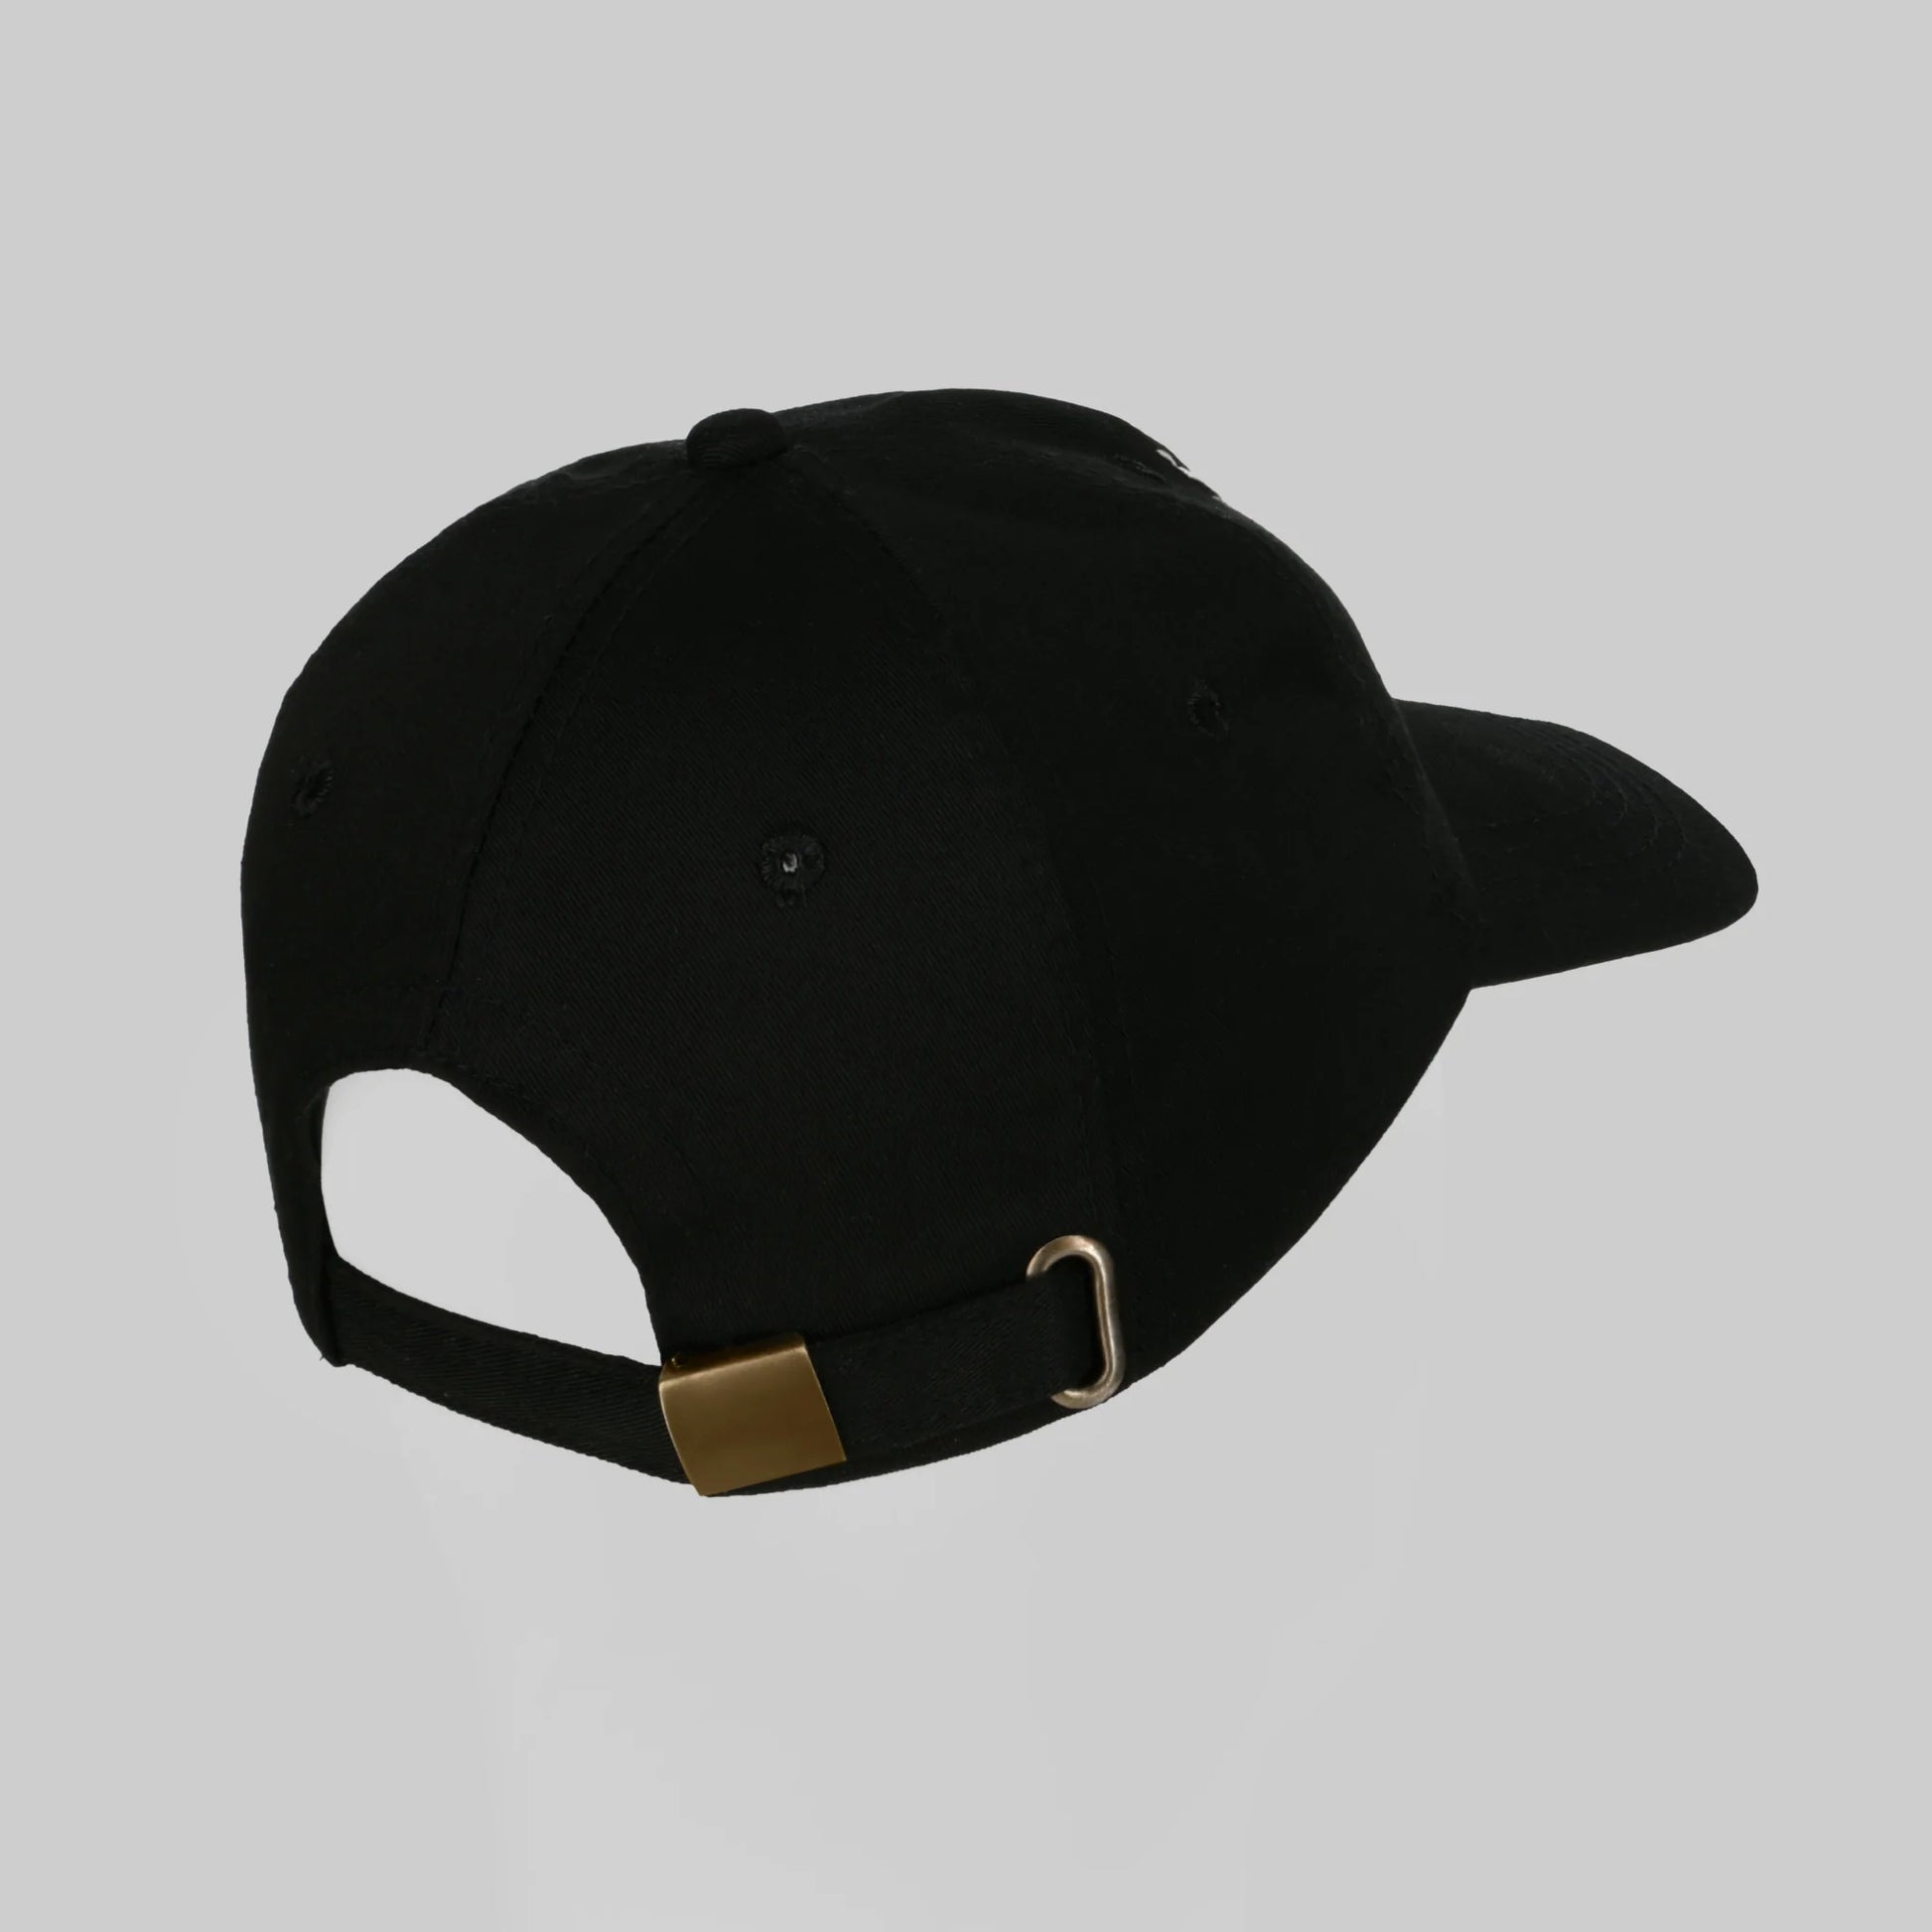 Trippy Embroidered Cap - trangoclothing